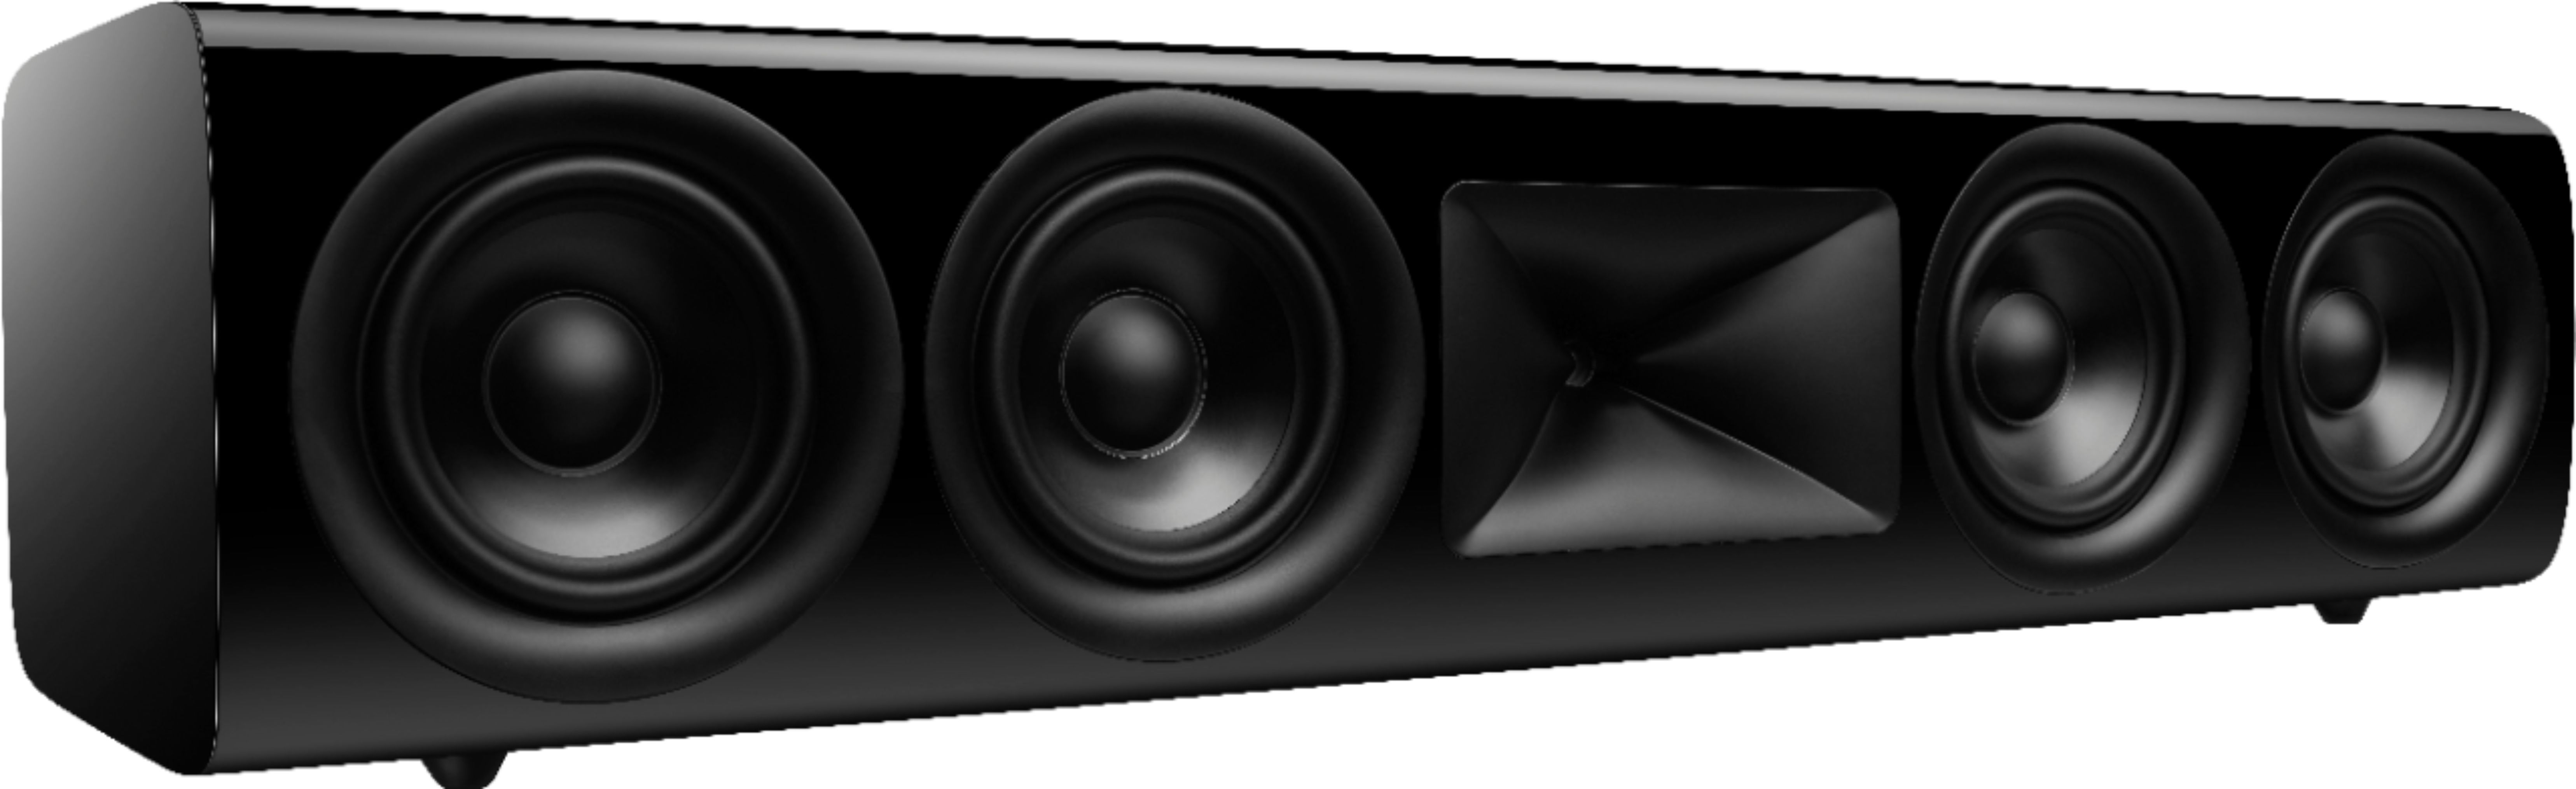 Angle View: JBL - HDI4500 Quadruple 5.25" 2-1/2 way Center Channel Loudspeaker with 1" compression tweeter - Gloss Black Finish